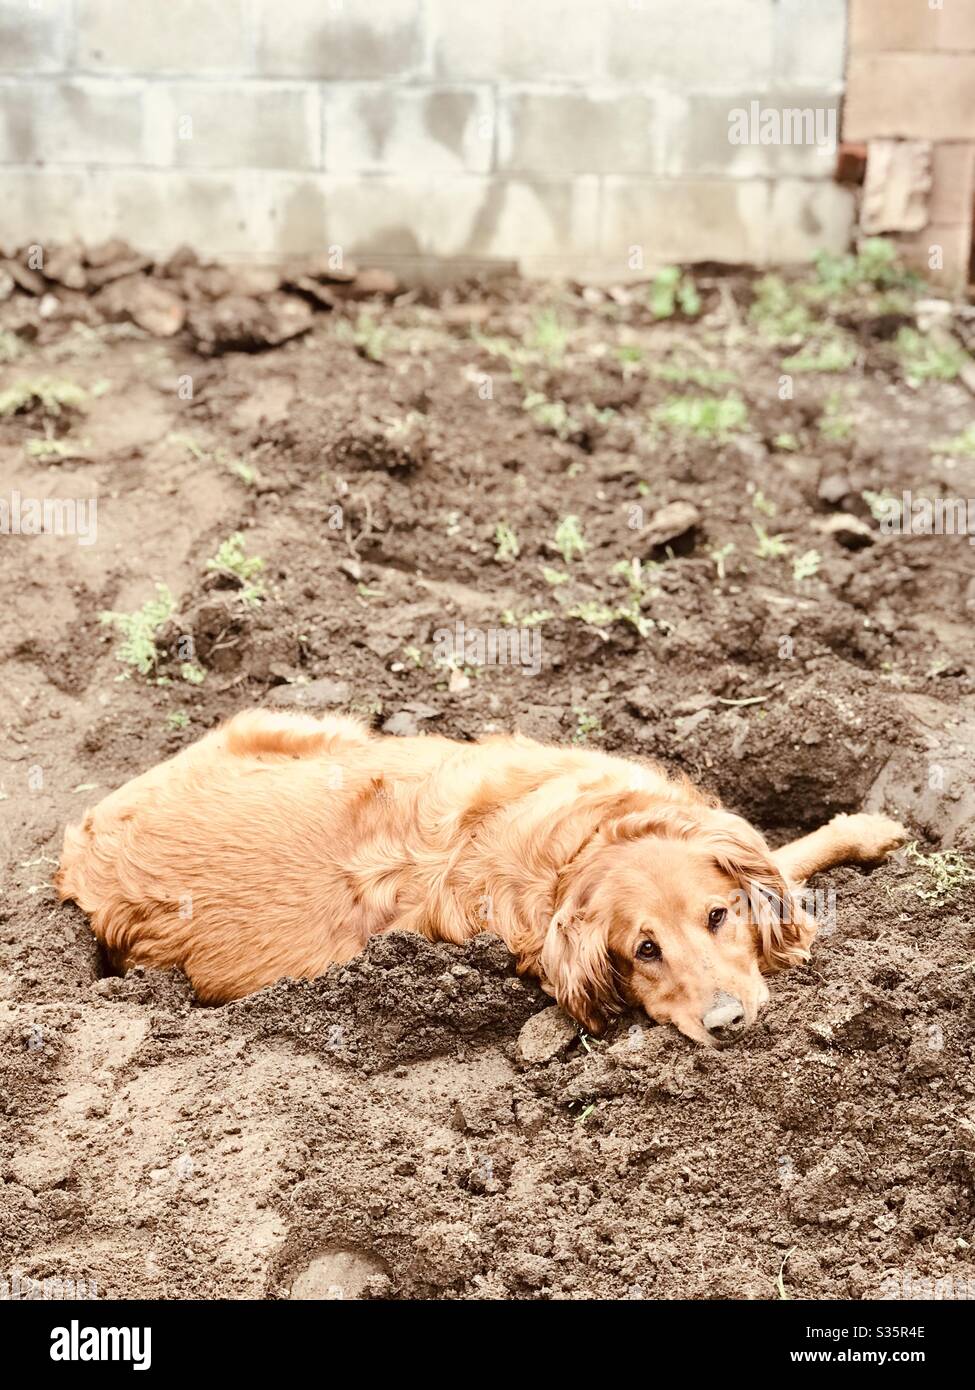 A golden retriever dog laying in the dirt outside and looking at the camera. Stock Photo